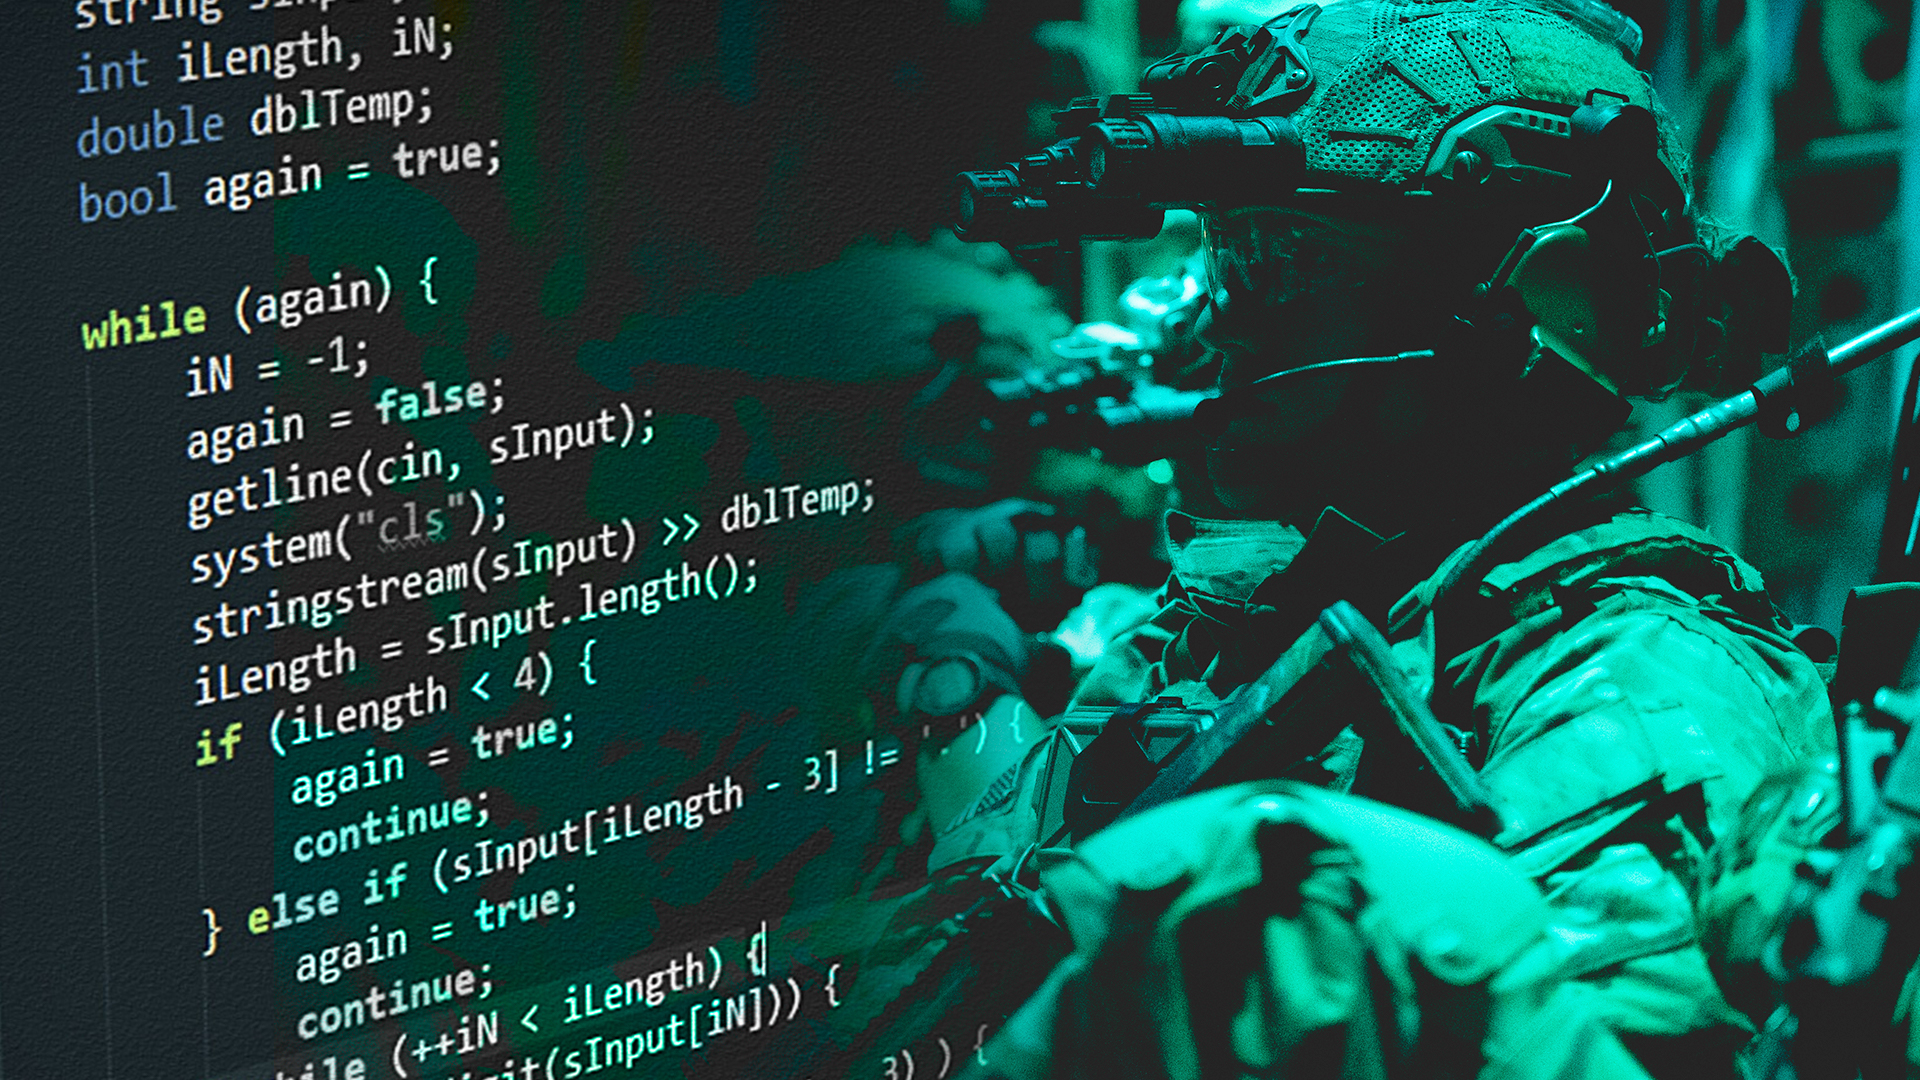 From combat to coding: Former Army Ranger explains how to break into tech after the military